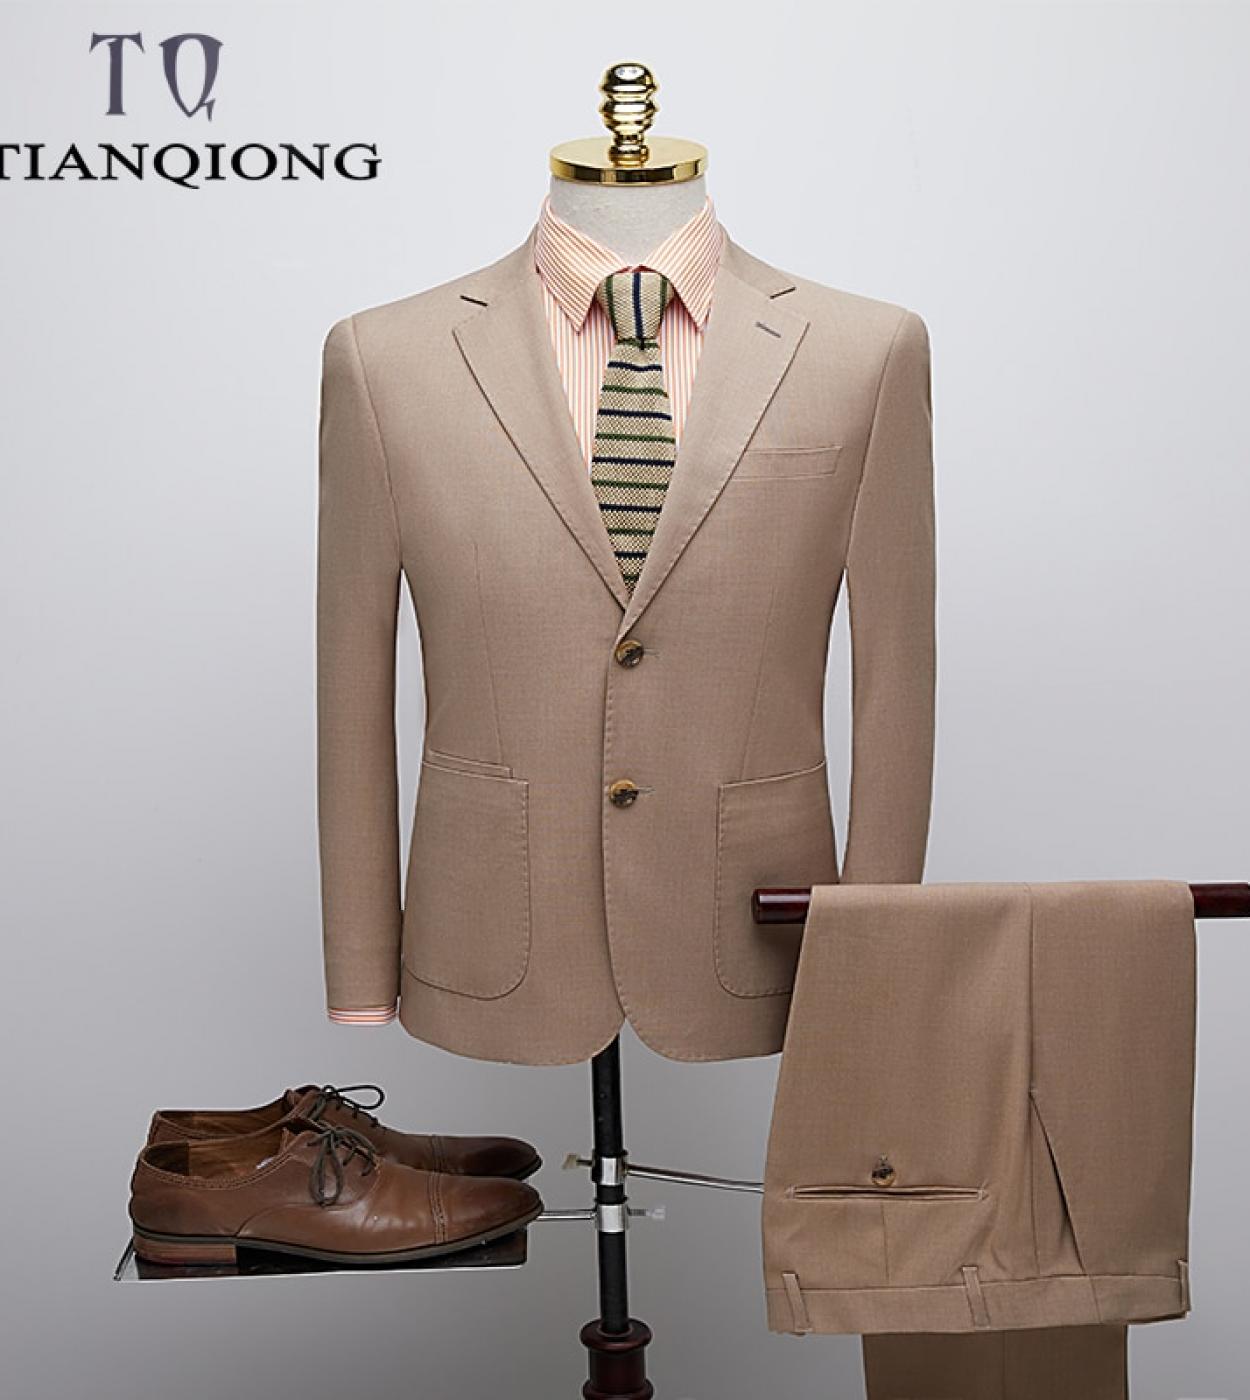 Tian Qiong jacketpantkhaki Mens Suit High End Prom Suits Stage Wear Costume Homme Mariage  Slim Fit Mens Suits With P